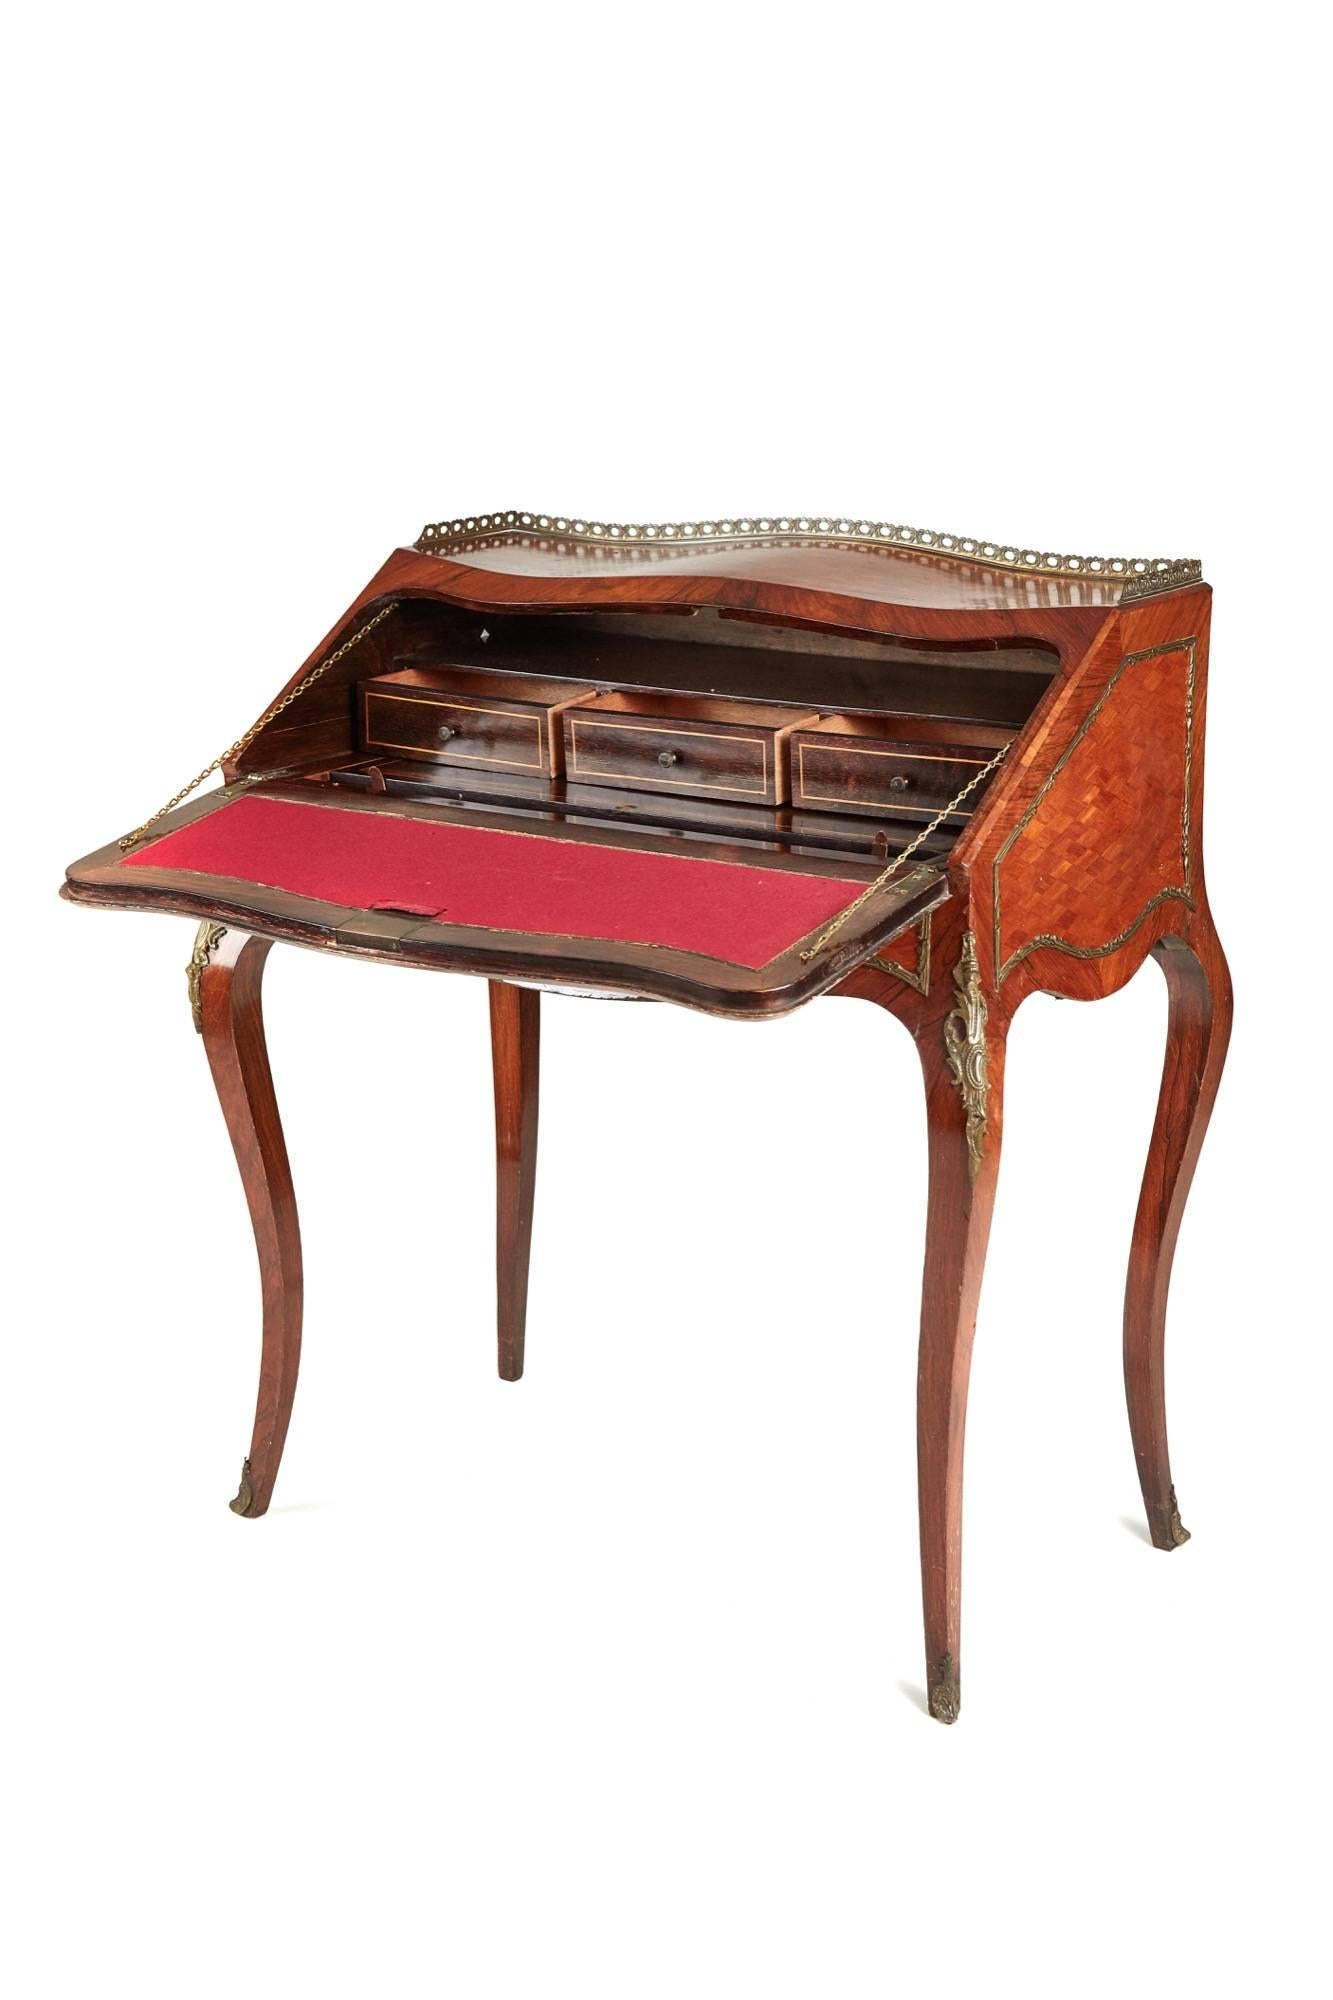 A French kingwood and parquetry bureau de dame, with a shaped parquetry top original gilt metal gallery, shaped parquetry ends with gilt metal mounts, lovely shaped vernis martin painted fall crossbanded in kingwood, the inside has a writing surface